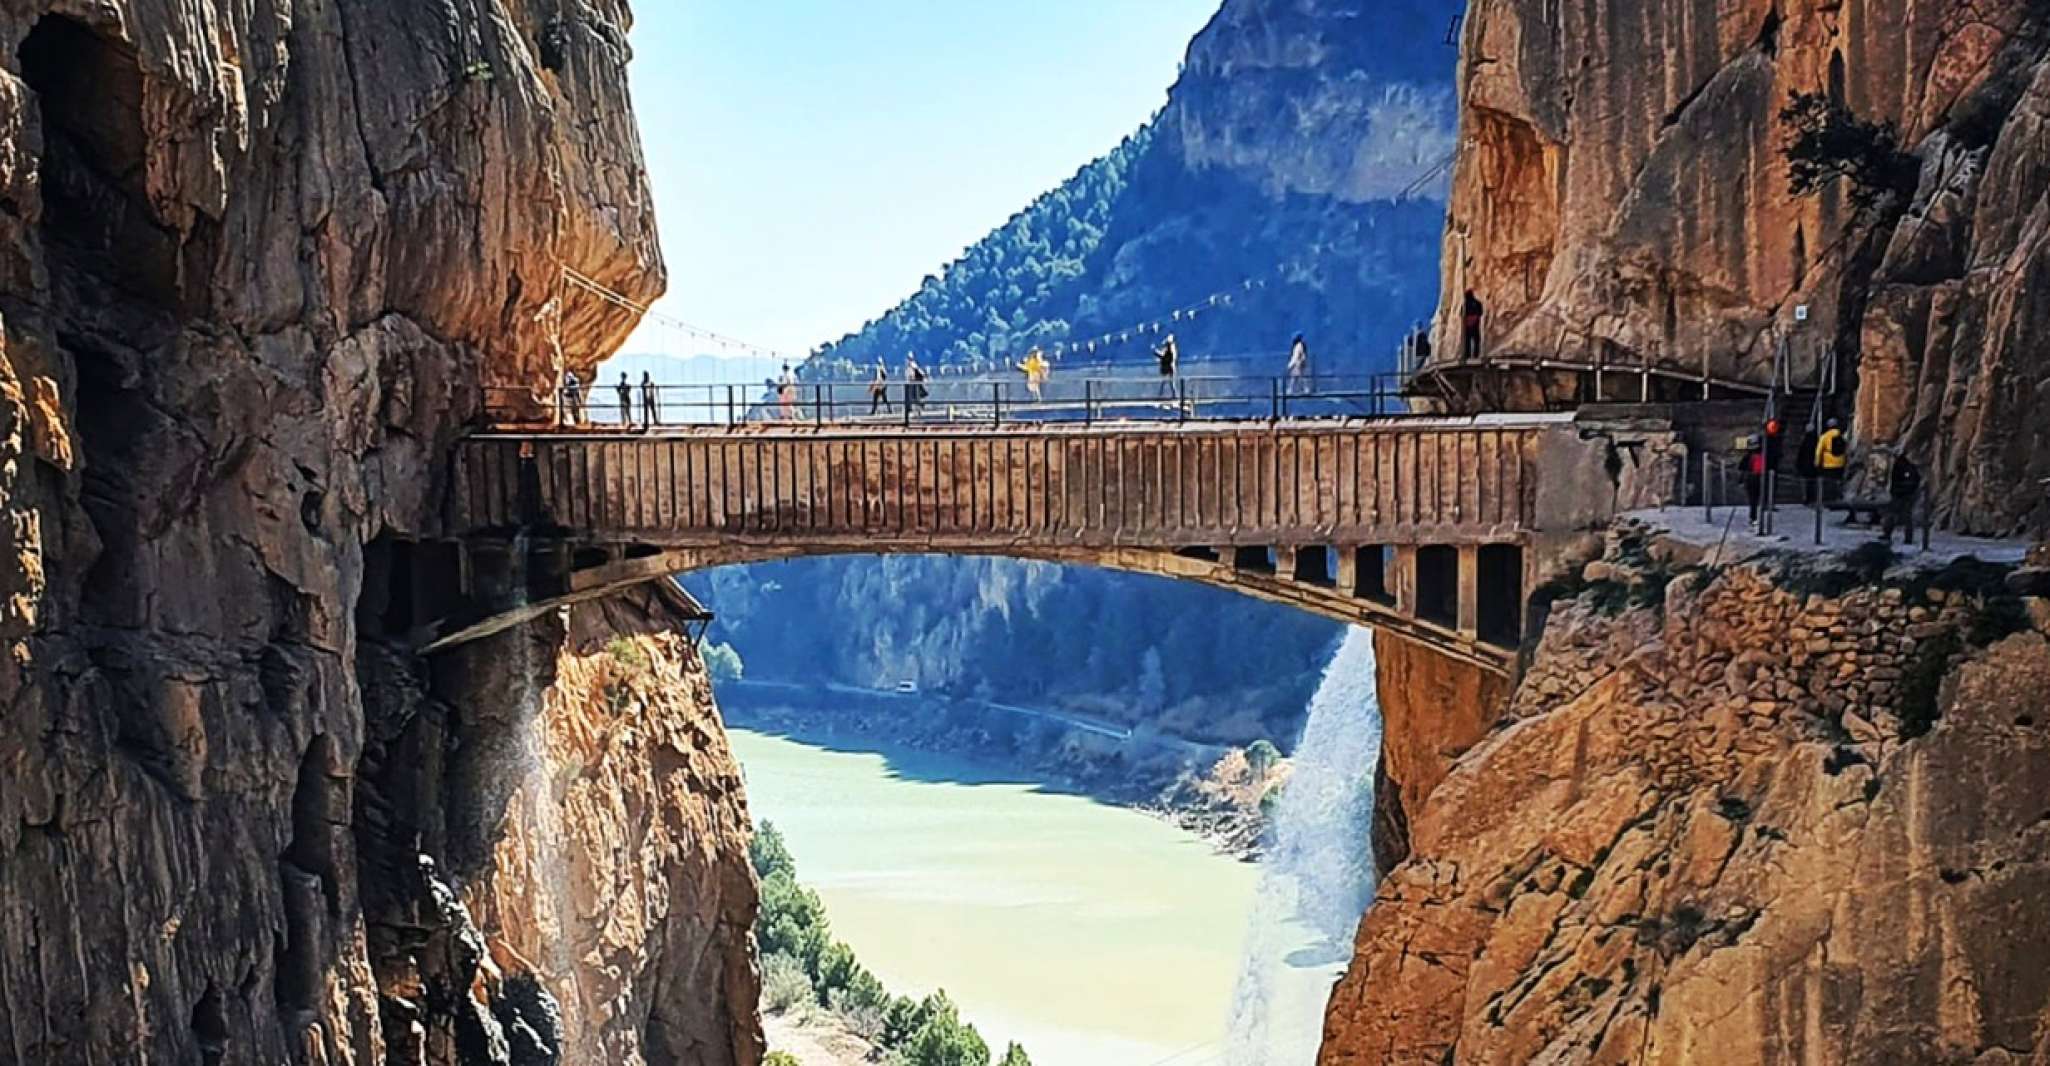 From Málaga, Caminito del Rey Guided Tour with Bus - Housity